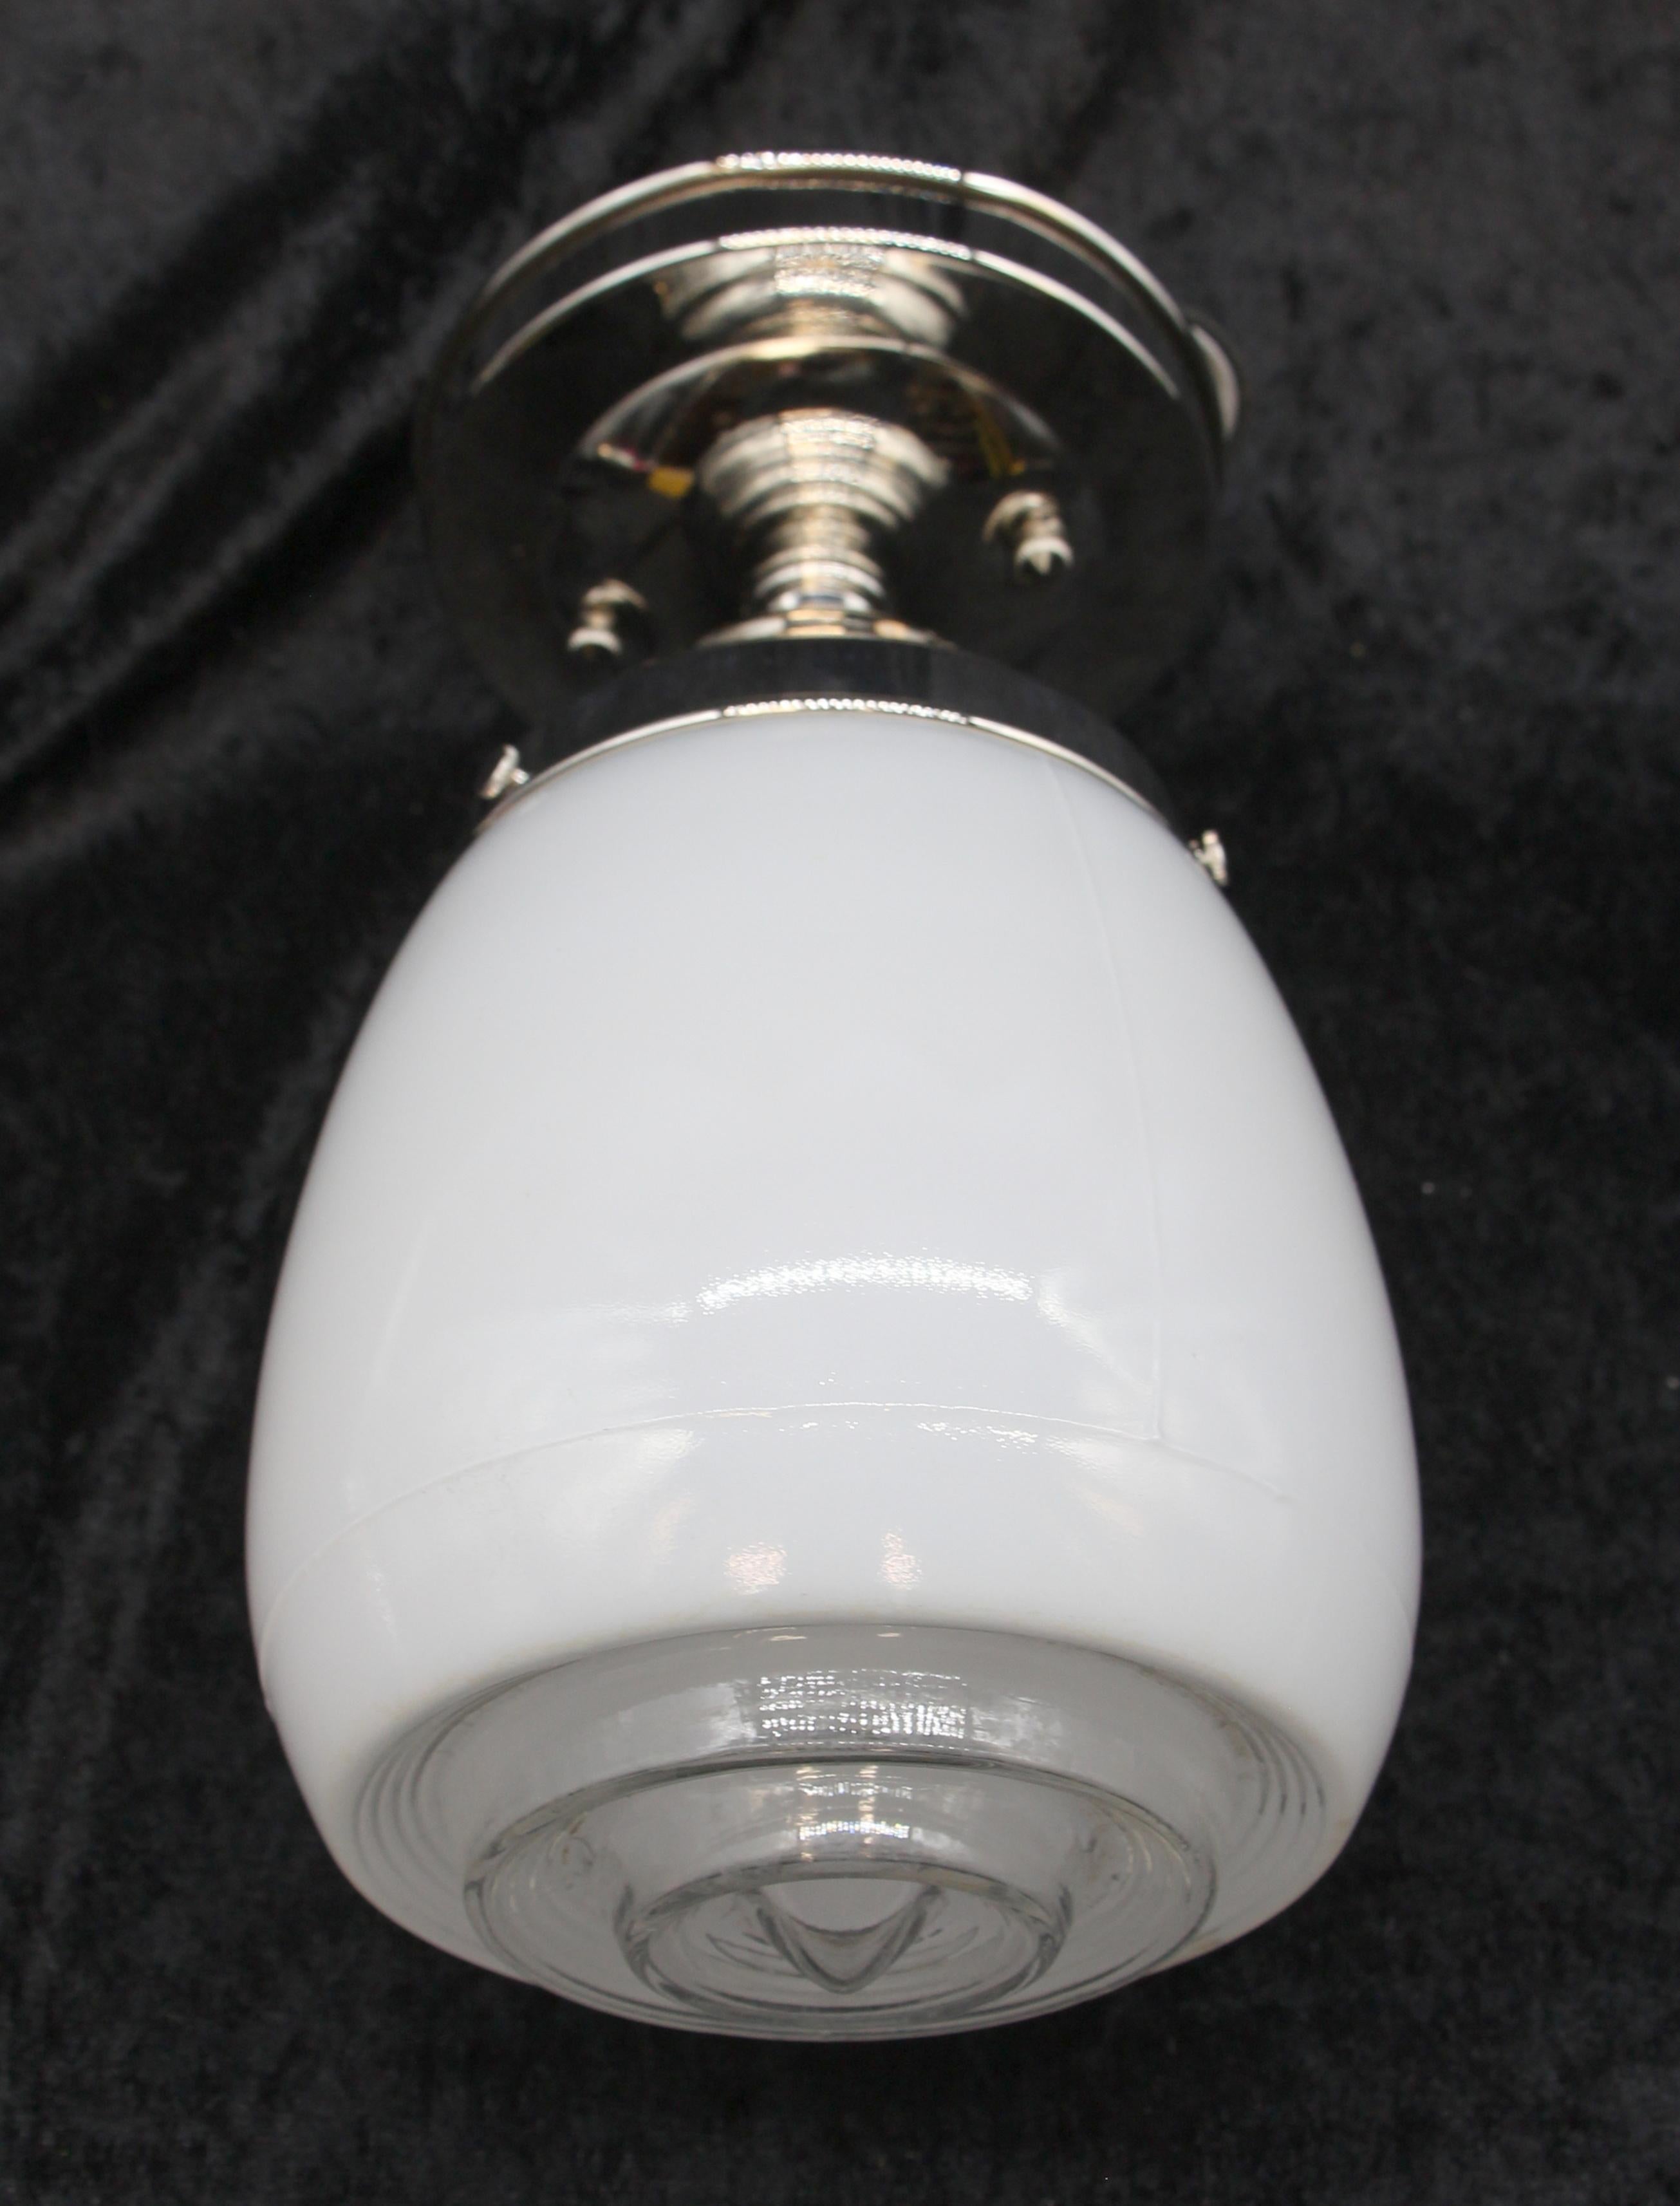 White glass Art Deco style shade mated to a semi flush mount light fixture with a nickel finish This shade features a clear concentric glass bottom to direct light downward.